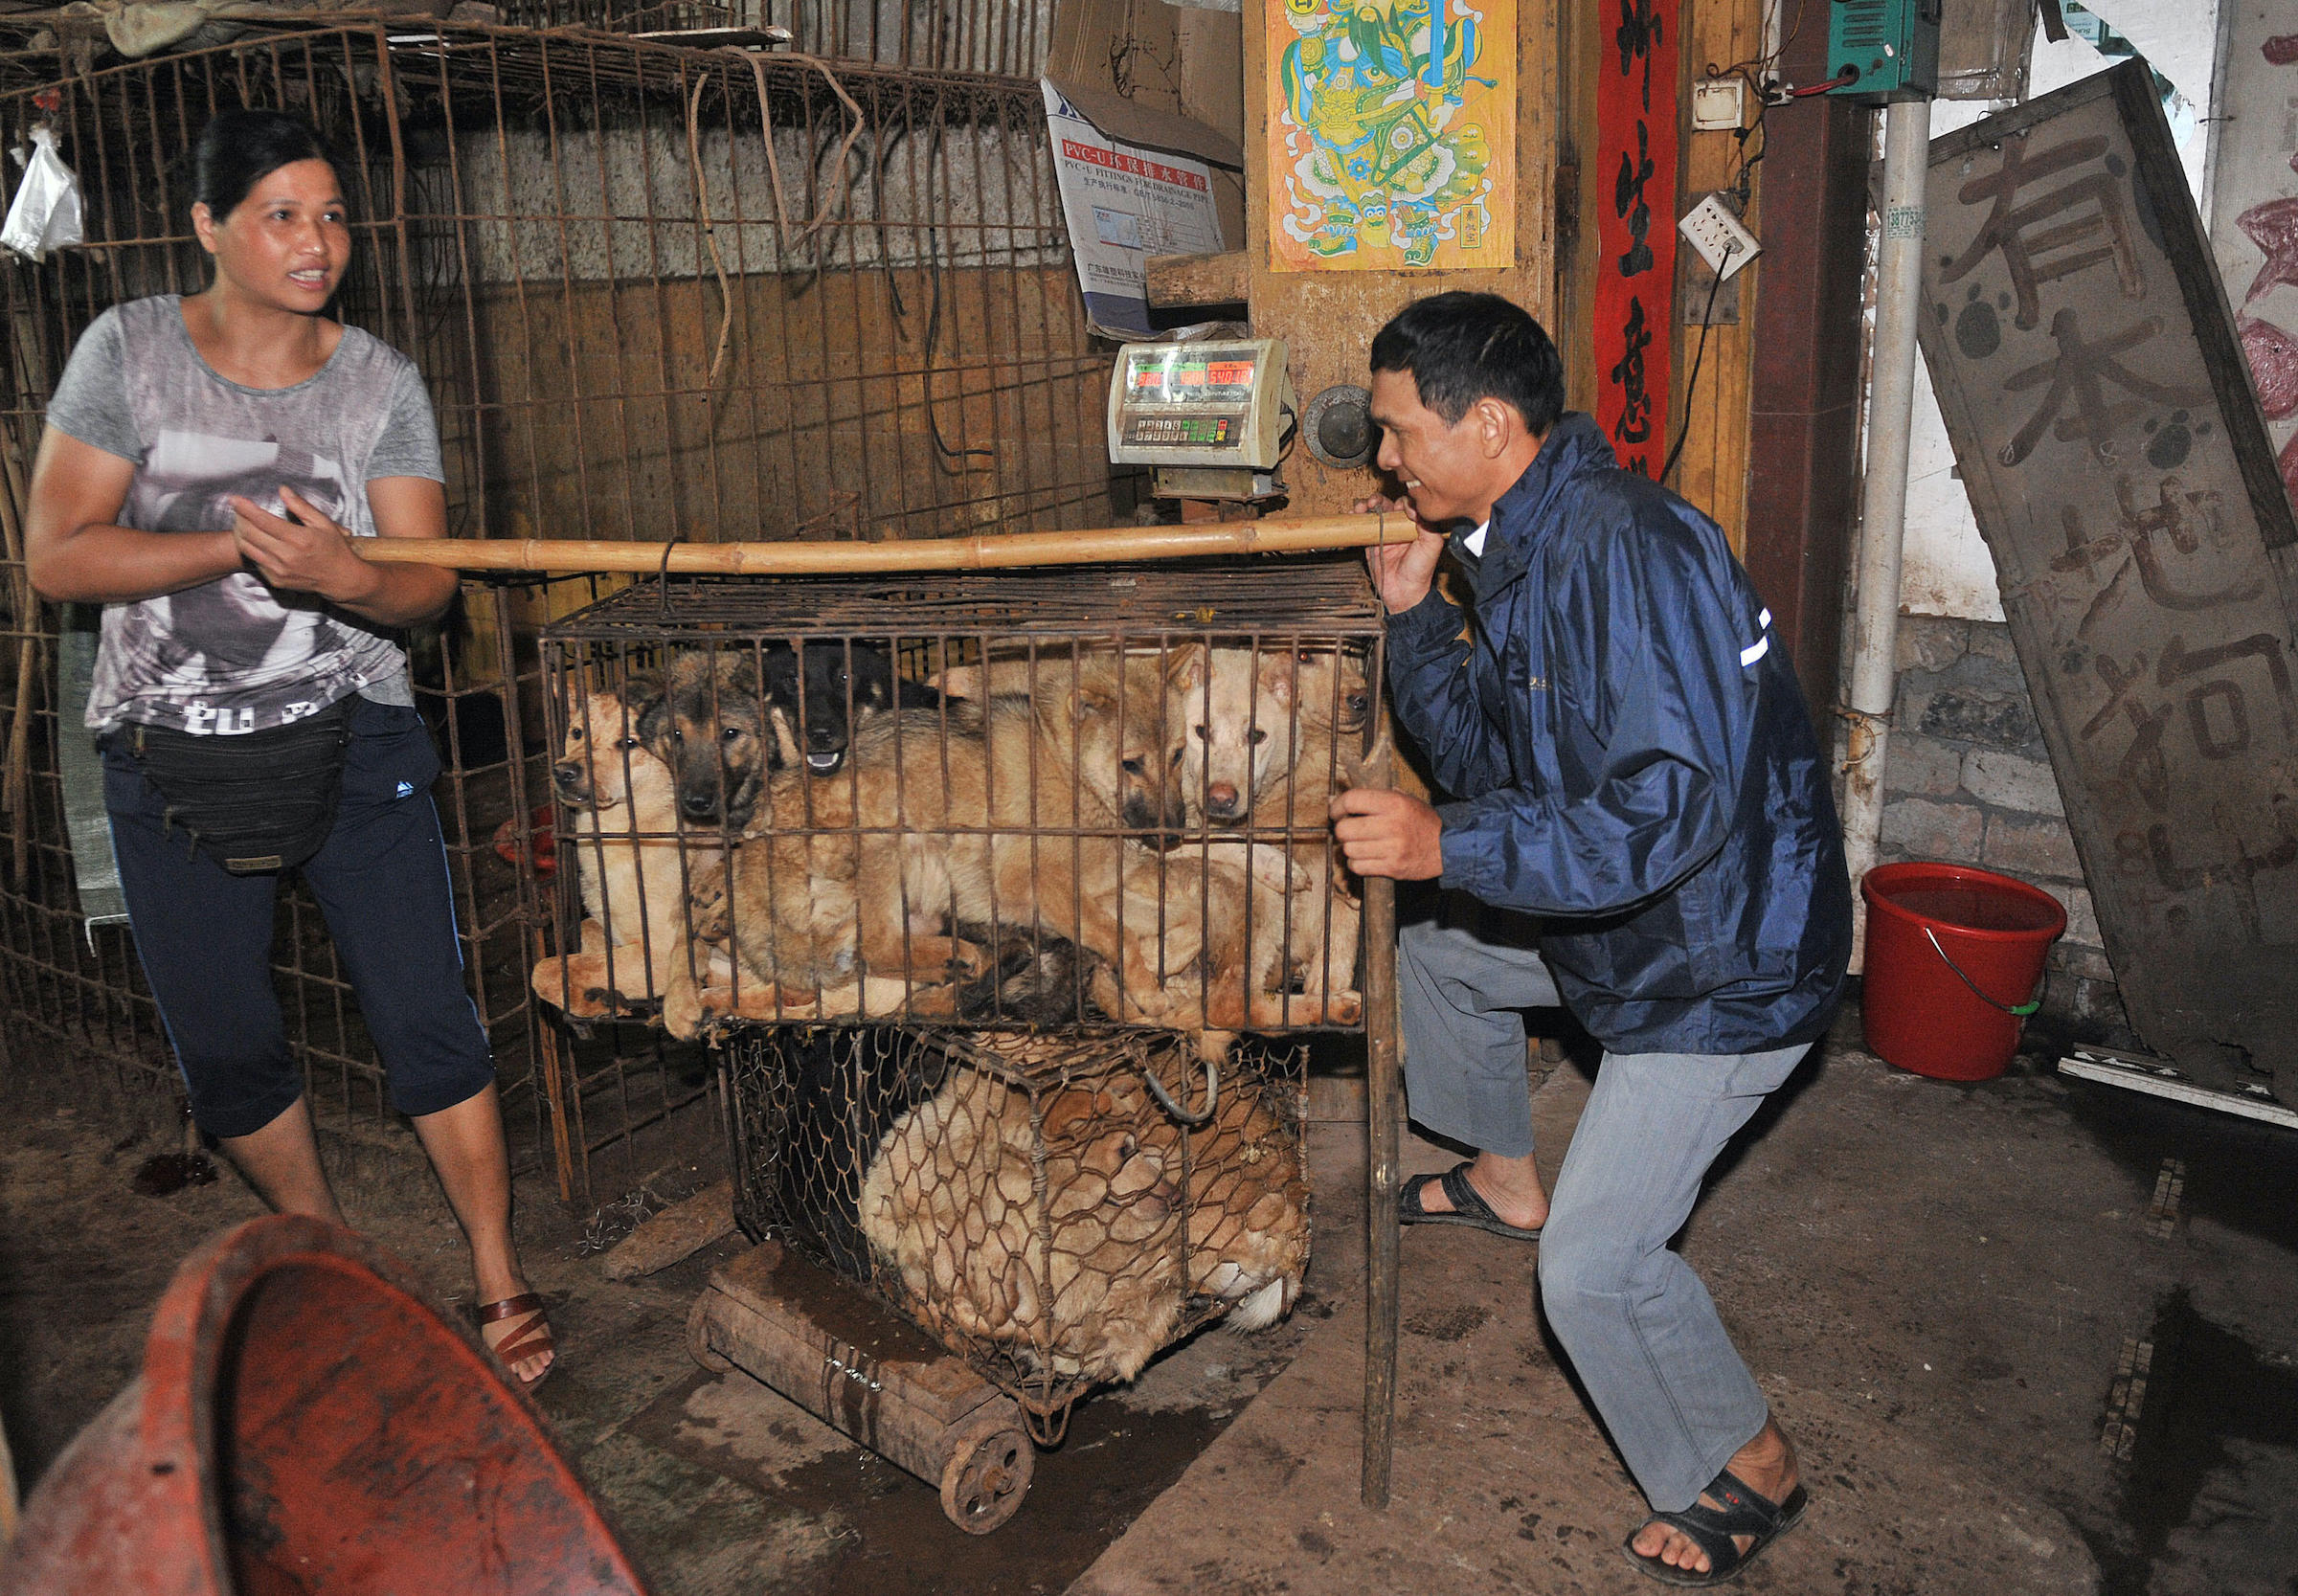 Dog meat festival: is it all about tourists? | China Dialogue